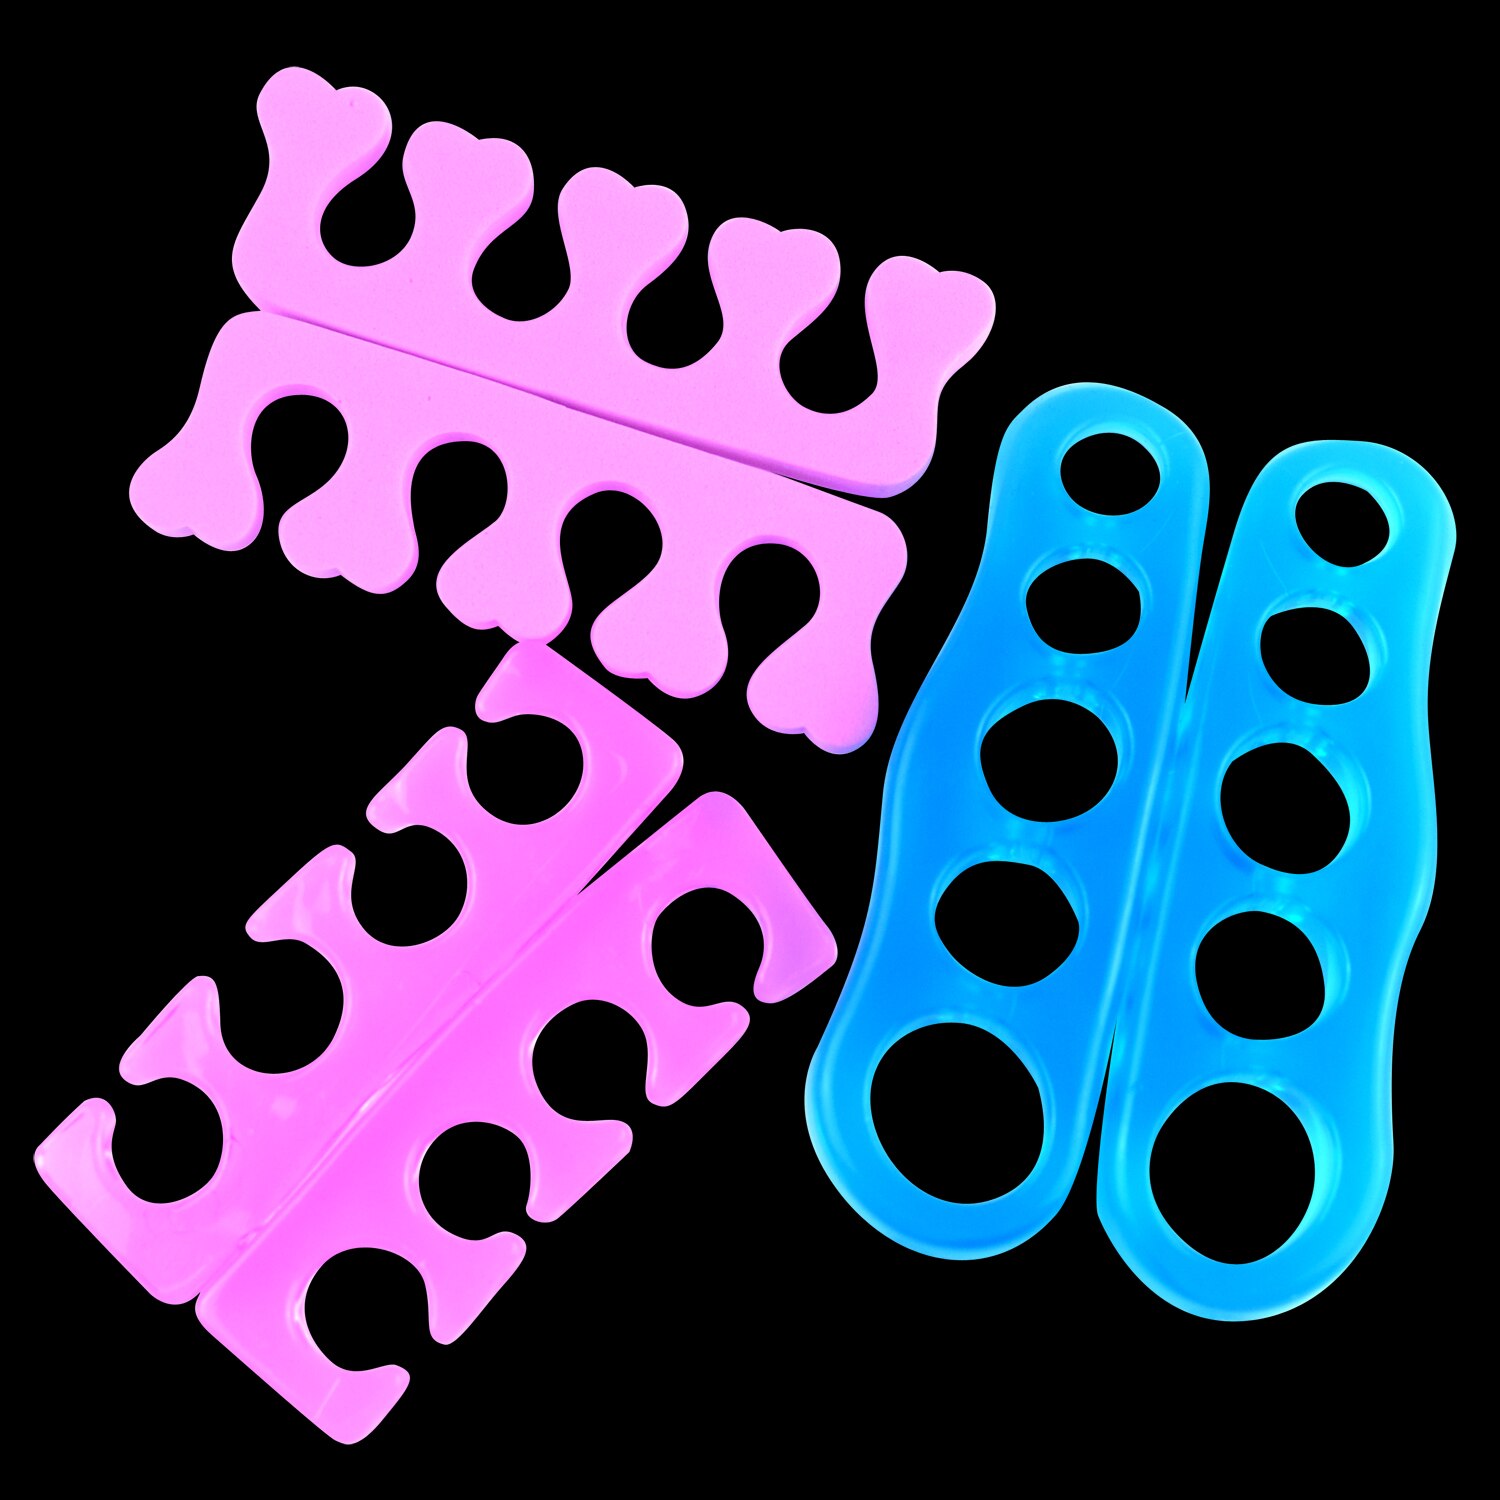 2 Pcs / Pack Silicone Soft Form Toe Separator / Finger Spacer For Manicure Pedicure Nail Tool Flexible Soft Silica Random Color